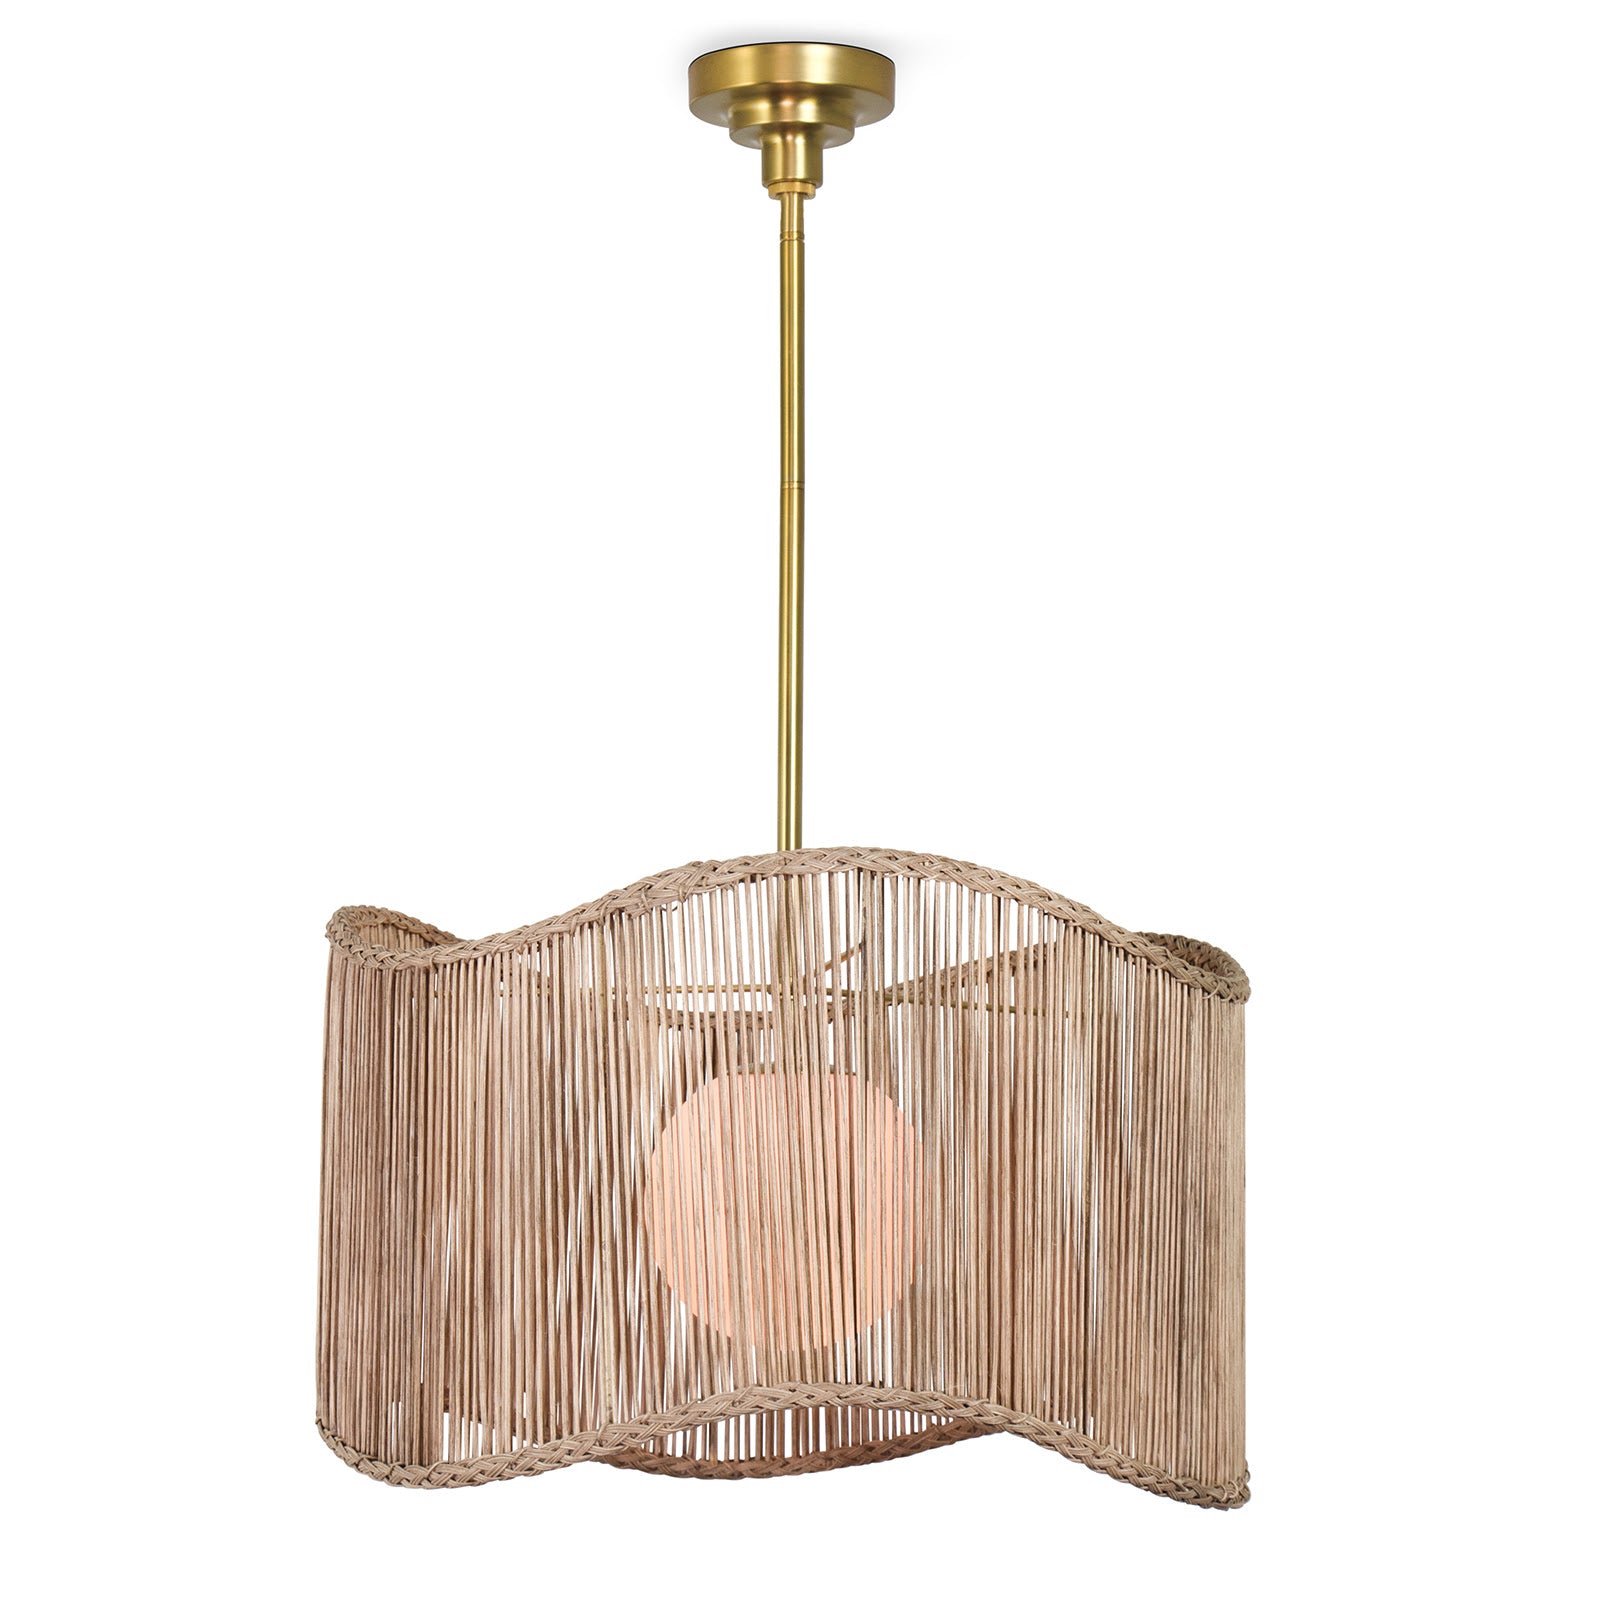 Nimes Drum Pendant in Natural by Coastal Living